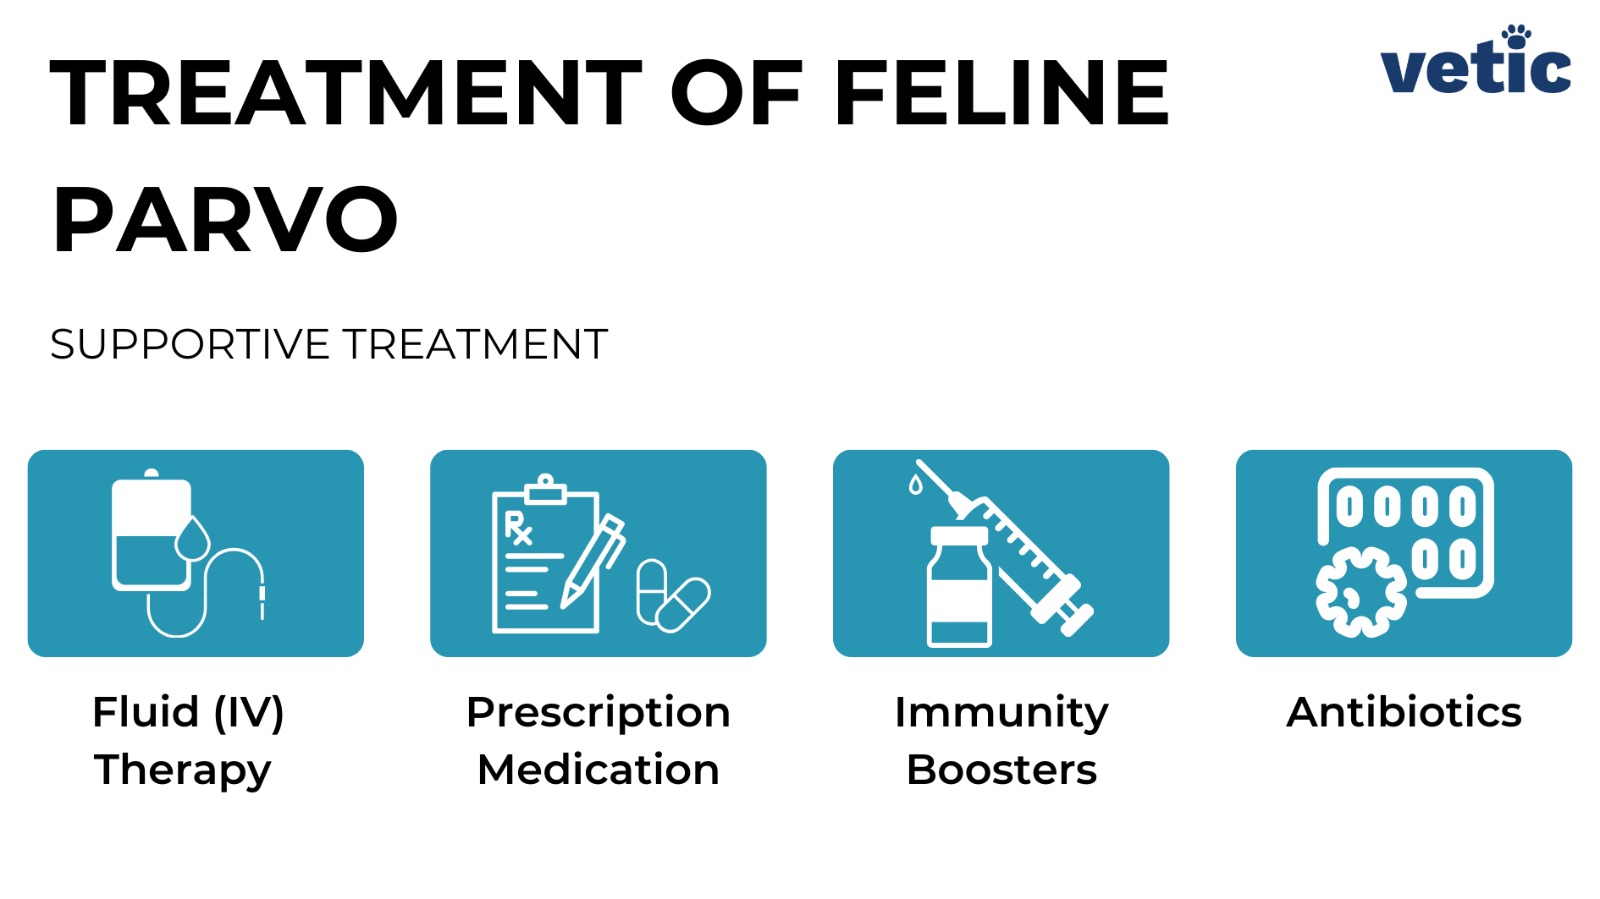 Infographic on Treatment of Feline Parvo Supportive Treatment is the only treatment available since there is no drug or antiviral that specifically targets FPV. Fluid (IV) Therapy Prescription Medication Immunity Boosters Antibiotics